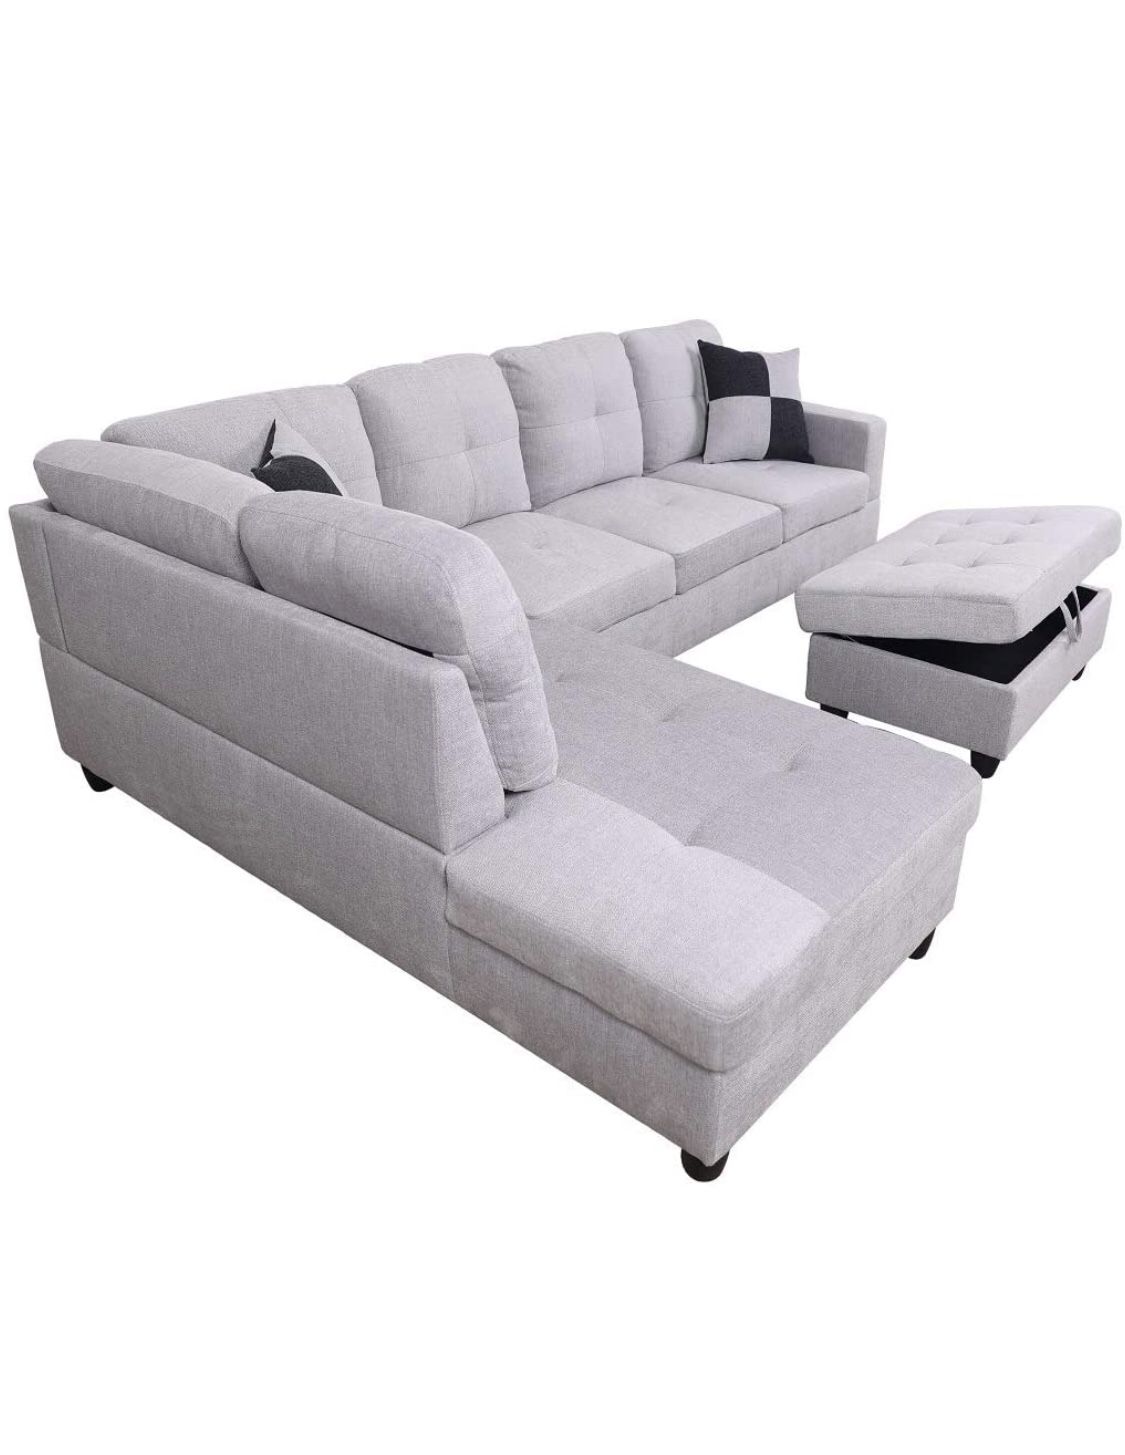 Gray-white Sectional Couch Ottoman. New